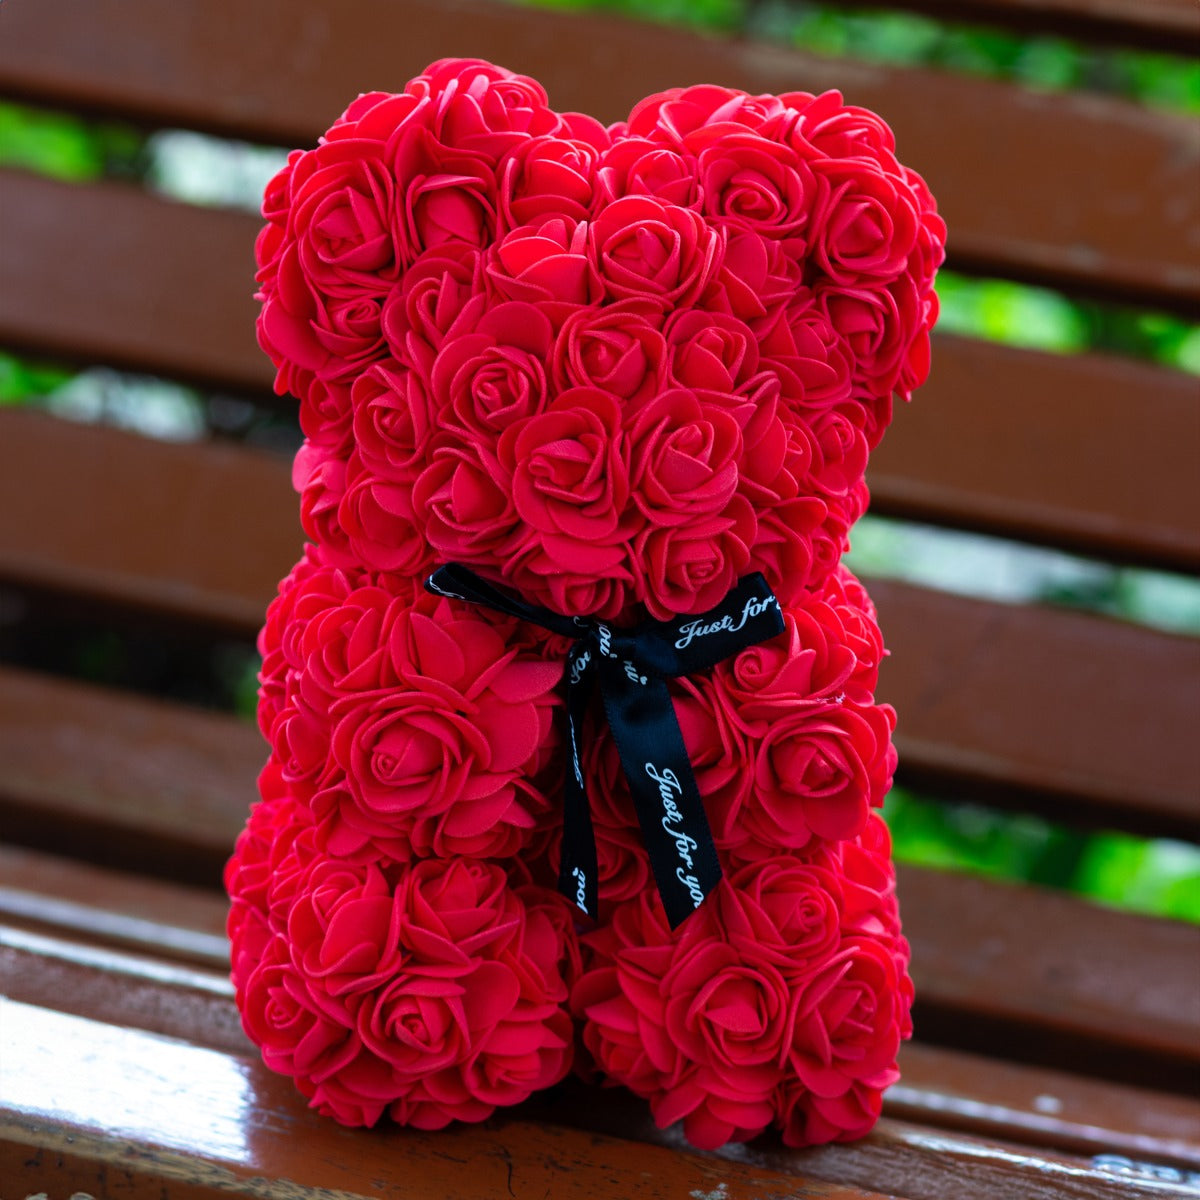 Handmade Rose Flower Teddy Bear With Bowknot Gift For Valentines Day Zaappy